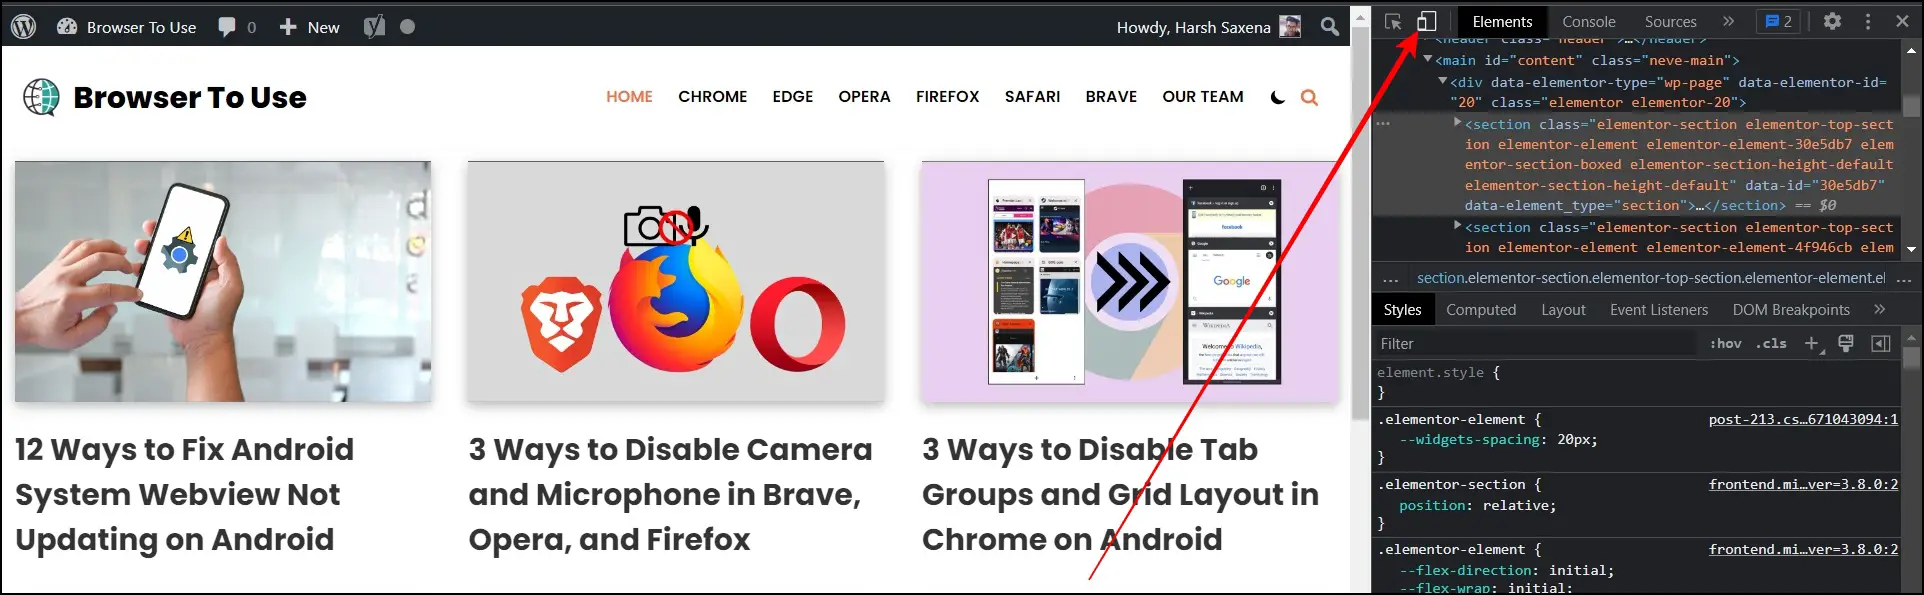 Using the Chrome's Inspect Tool On Mac to View Mobile Version of Website on Chrome Computer